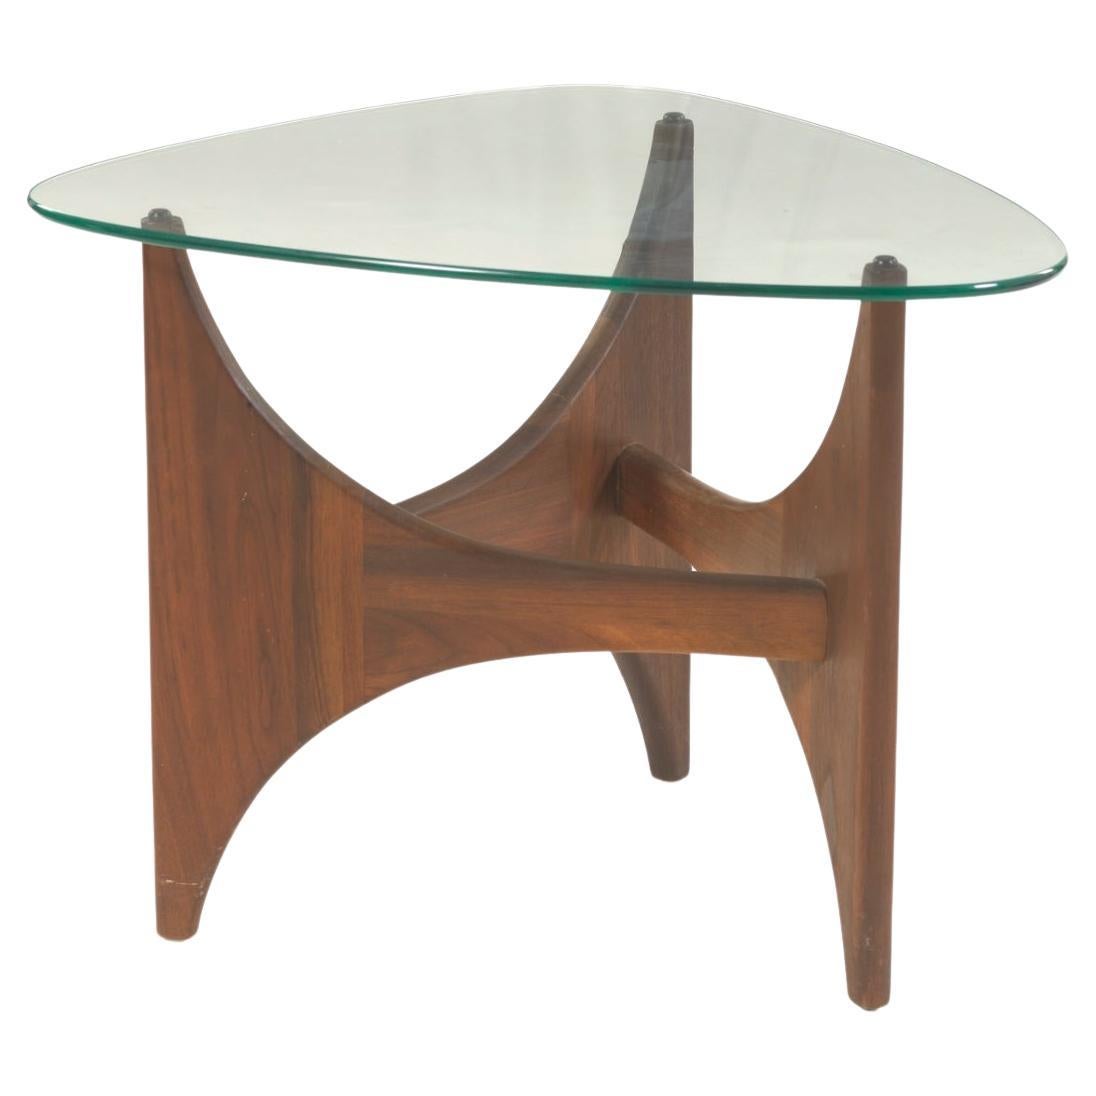 Table d'appoint triangulaire en noyer huilé Adrian Pearsall